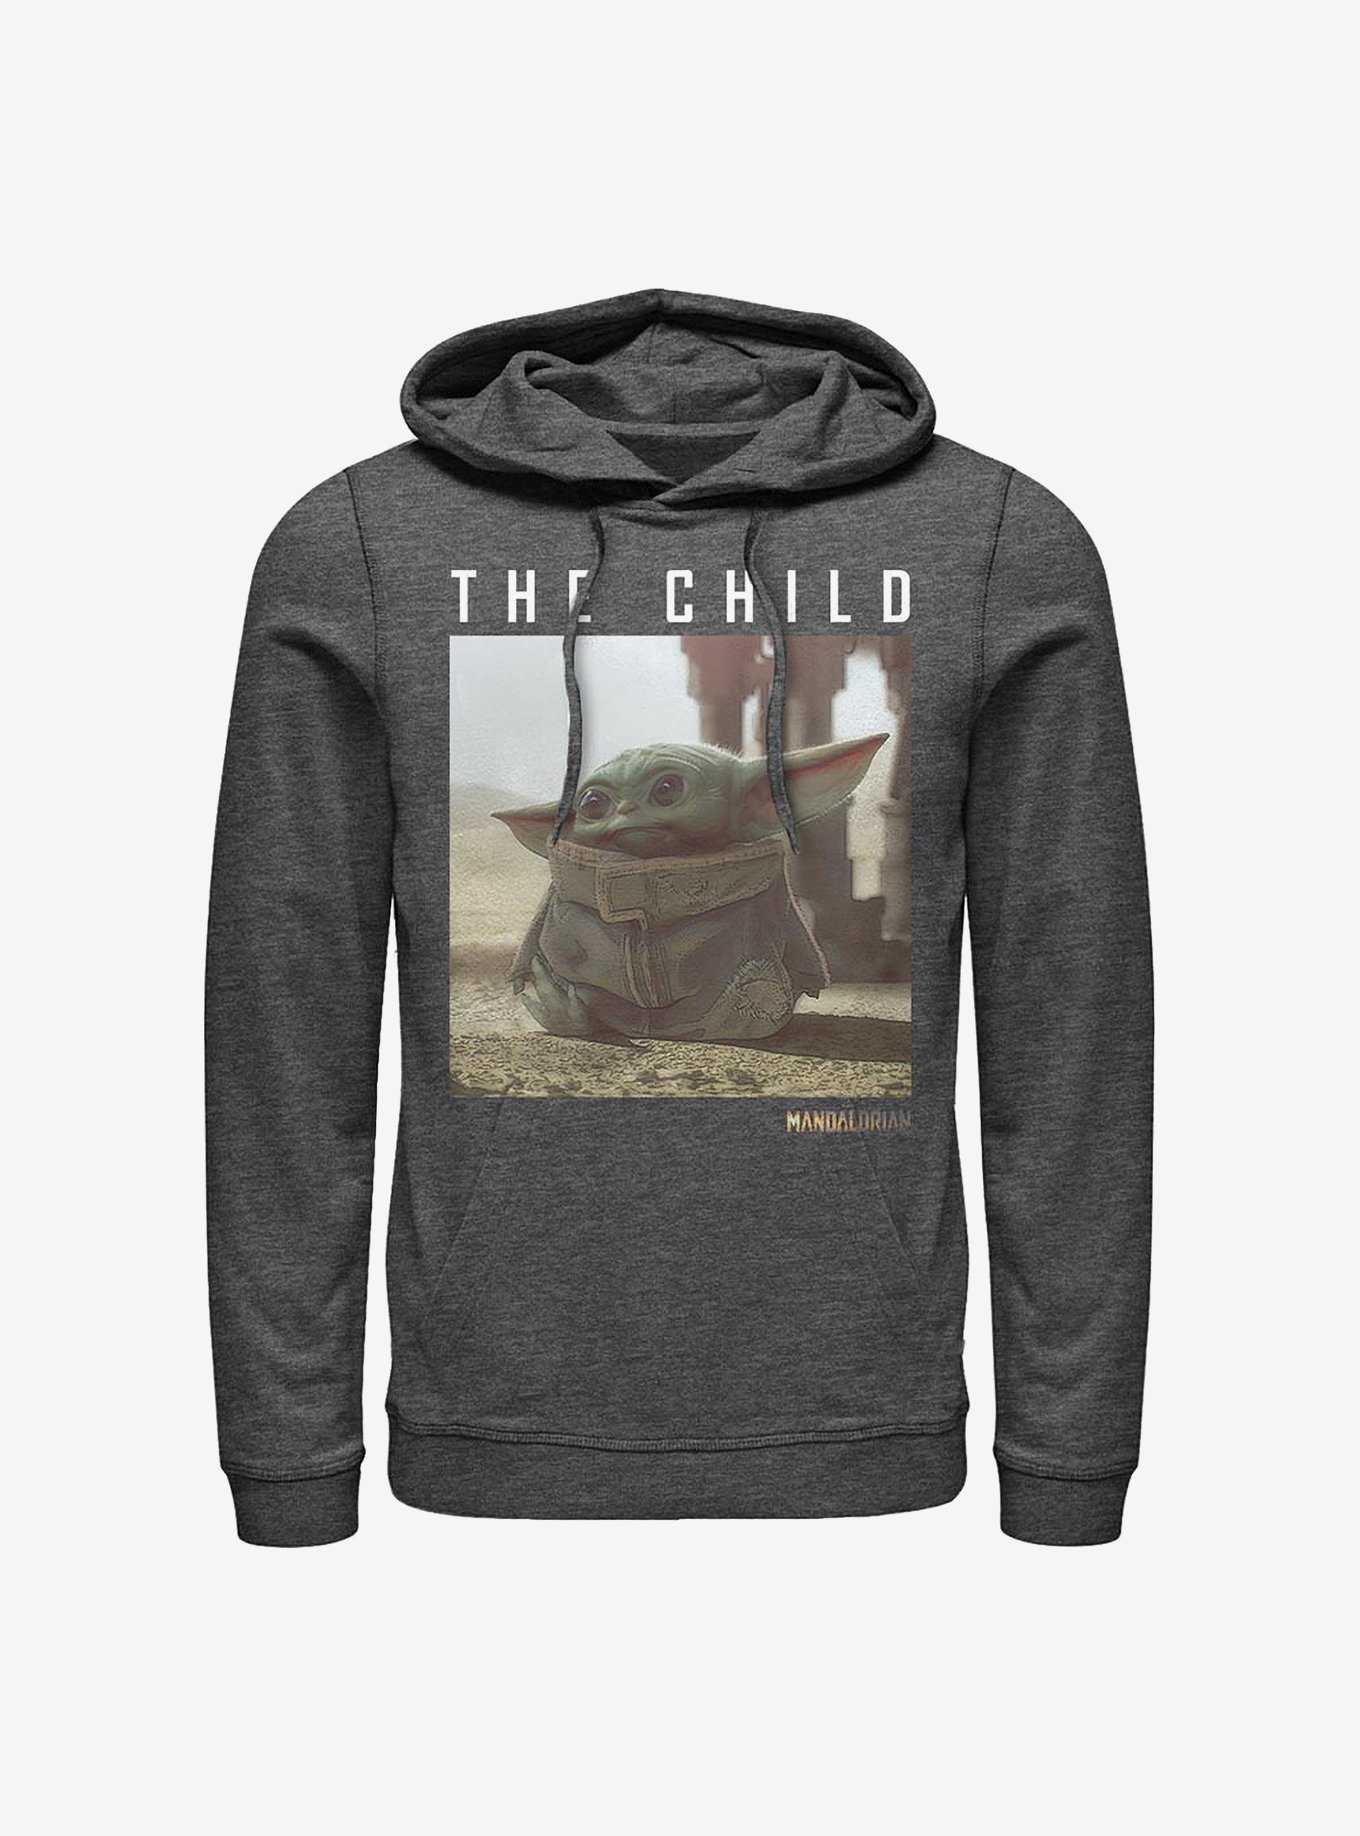 Star Wars The Mandalorian The Child Classic Pose Hoodie, , hi-res